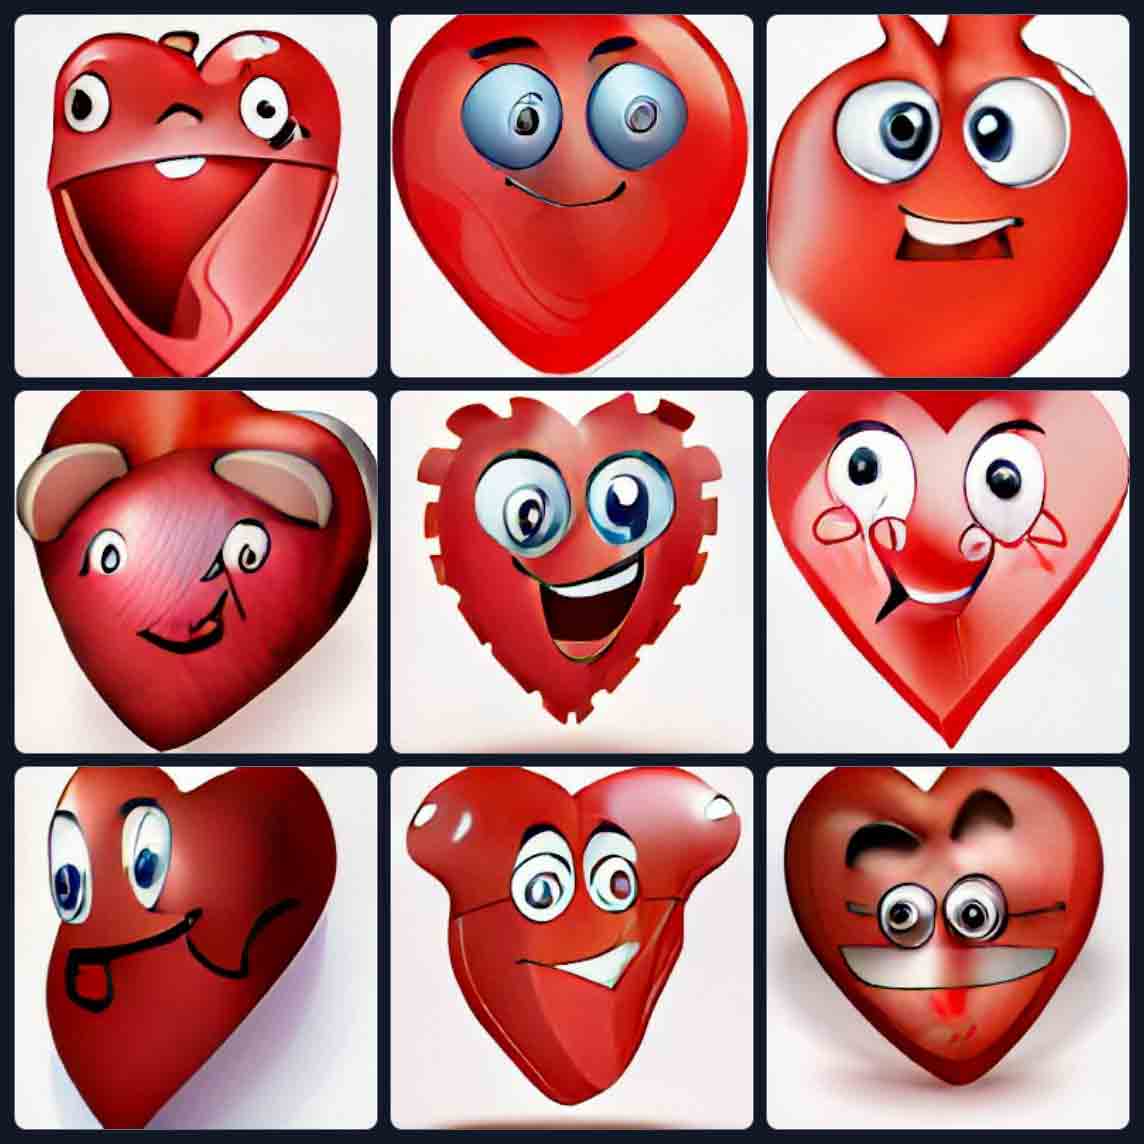 9 variations on a traditional red heart, each with happy eyes, a goofy smile, open- and closed-mouth, and a couple appear to be wearing glasses. Another appears to have mouse ears?